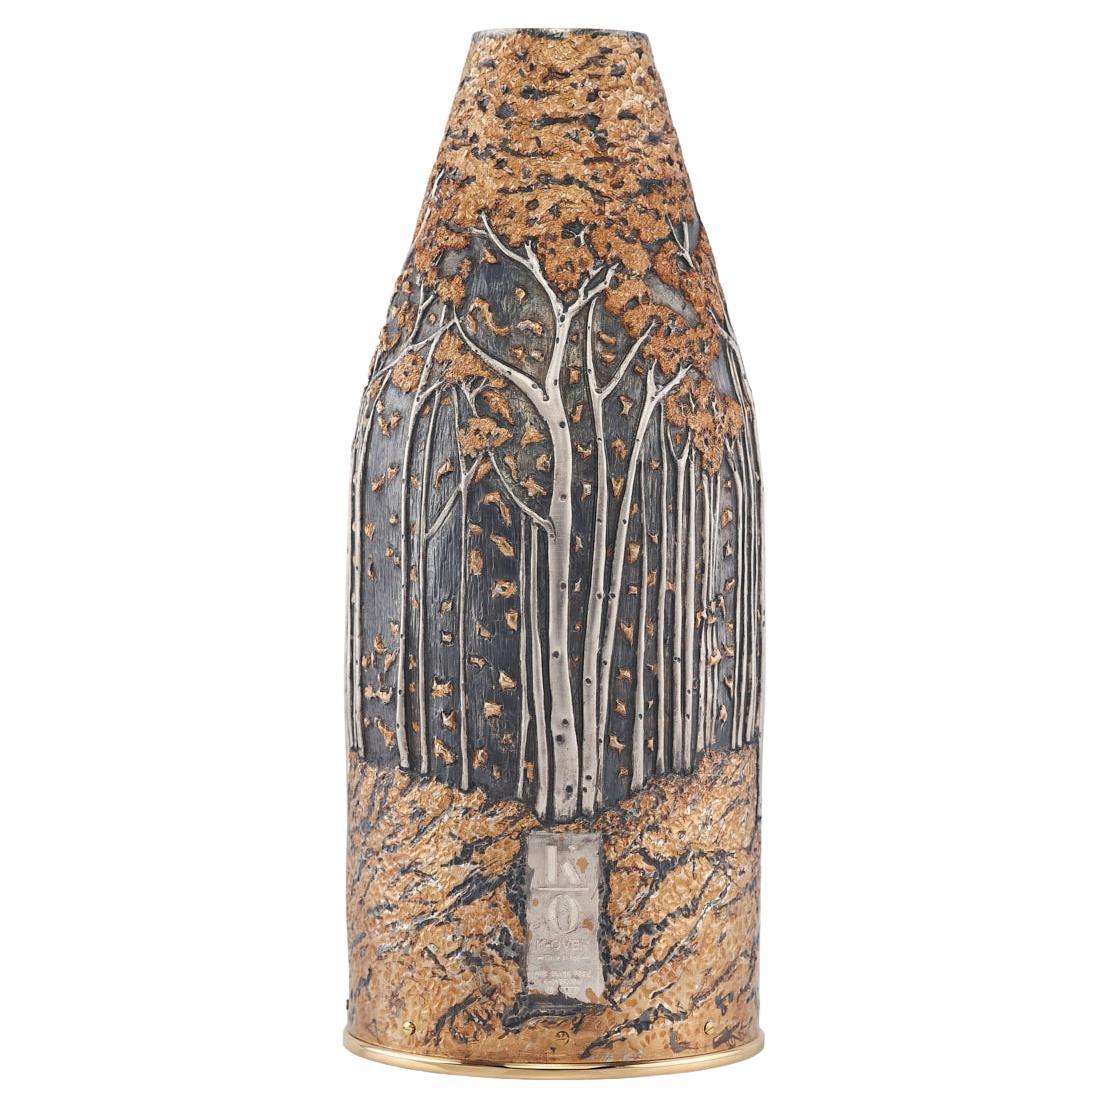 K-OVER Champagne, WOOD IN AUTUMN, silver 999/°°, Italy